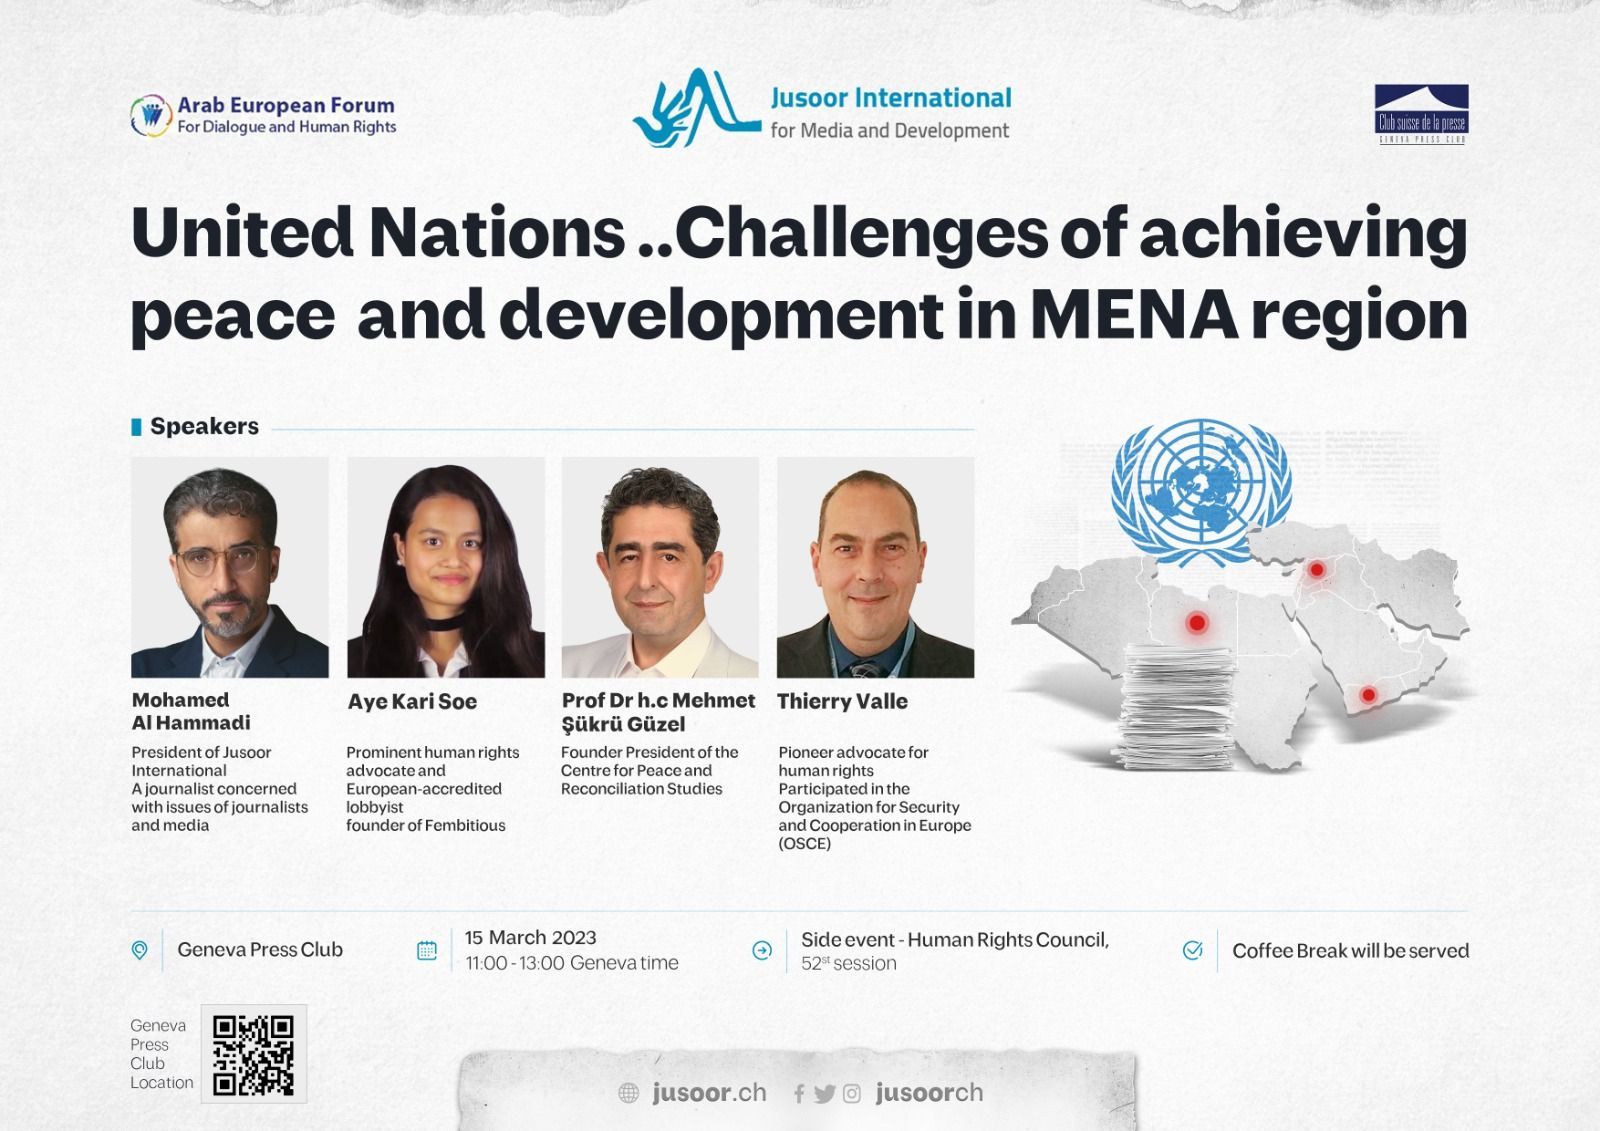 Challenges of the United Nations in achieving peace and development in the Middle East and North Africa: Libya, Syria, Yemen